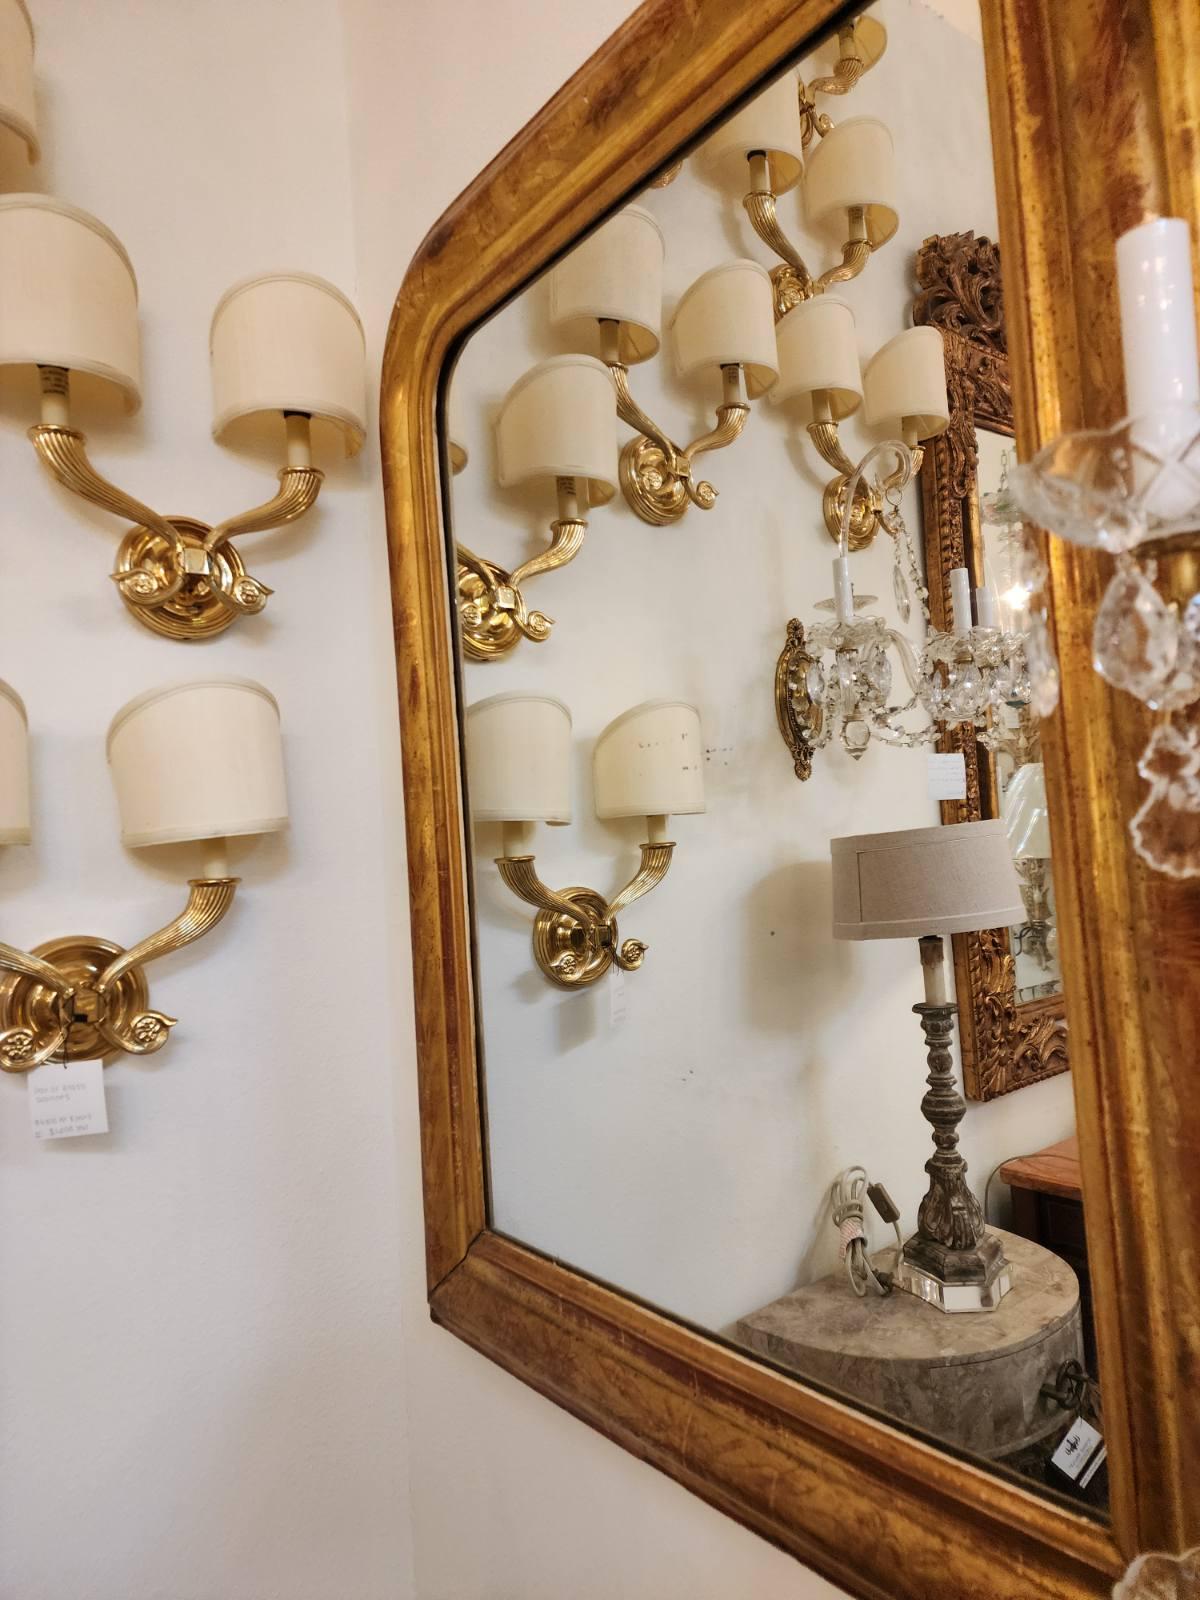 This French Louis Philippe period giltwood wall mirror from the mid-19th century is a stunning piece featuring an arched frame adorned with intricate floral motifs. The elegance of the giltwood accents adds a touch of luxury to the mirror, which